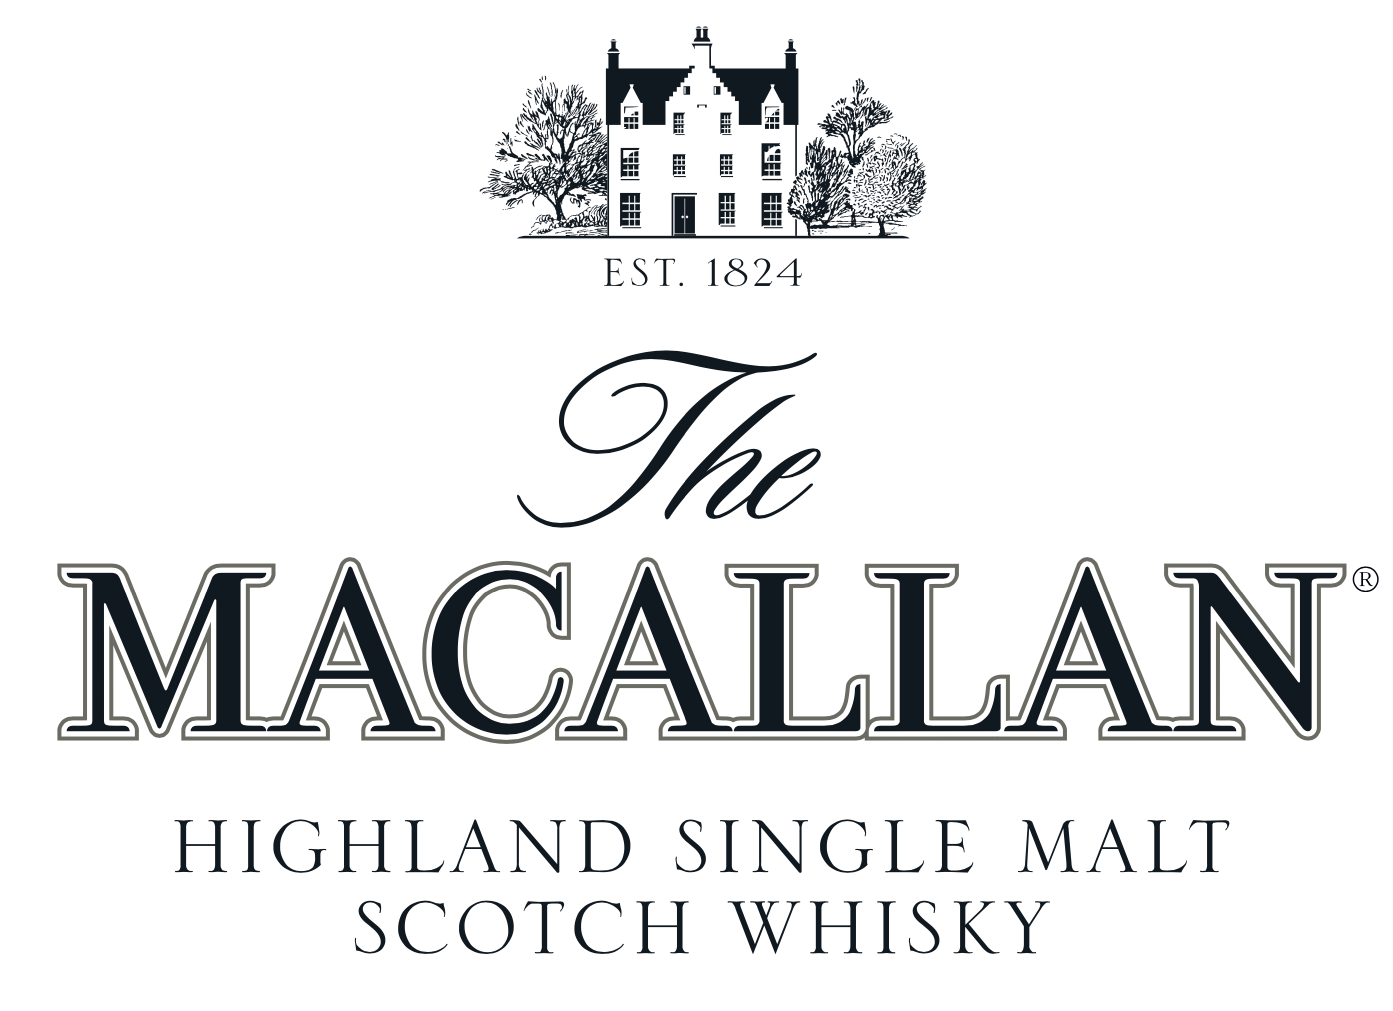 In partnership with The Macallan